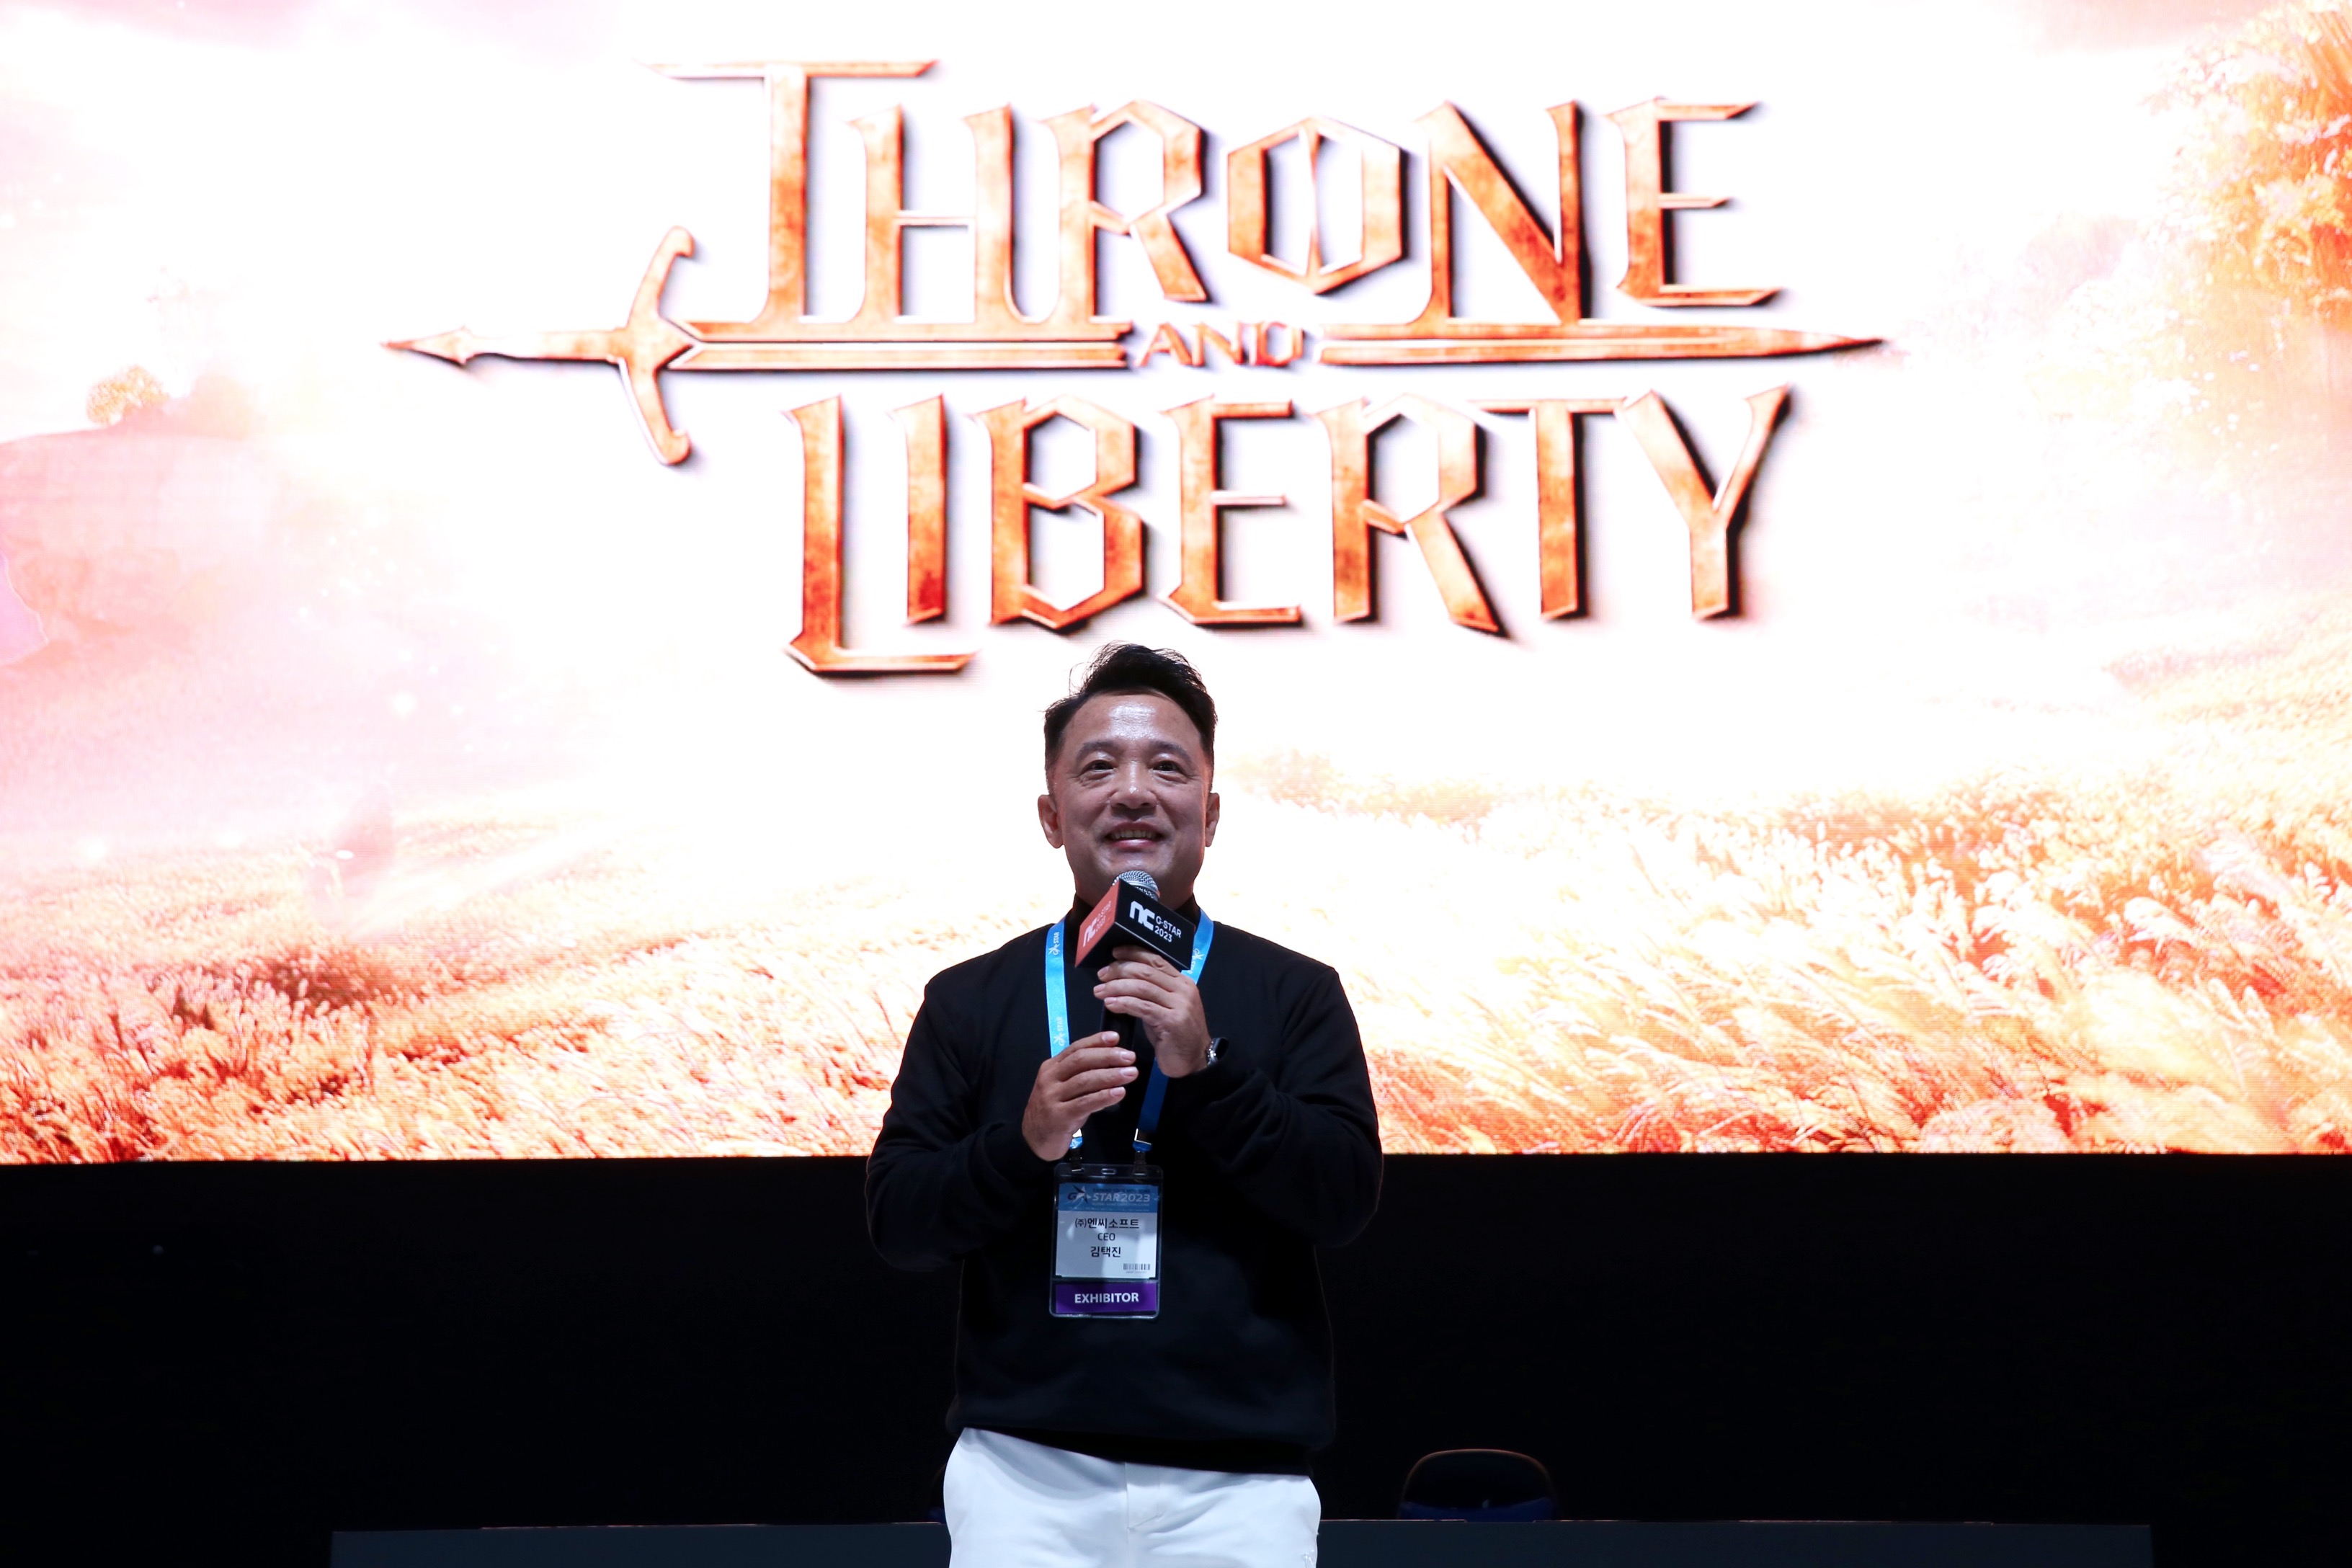 NCSOFT's Throne and Liberty to hit global market in 2024 - The